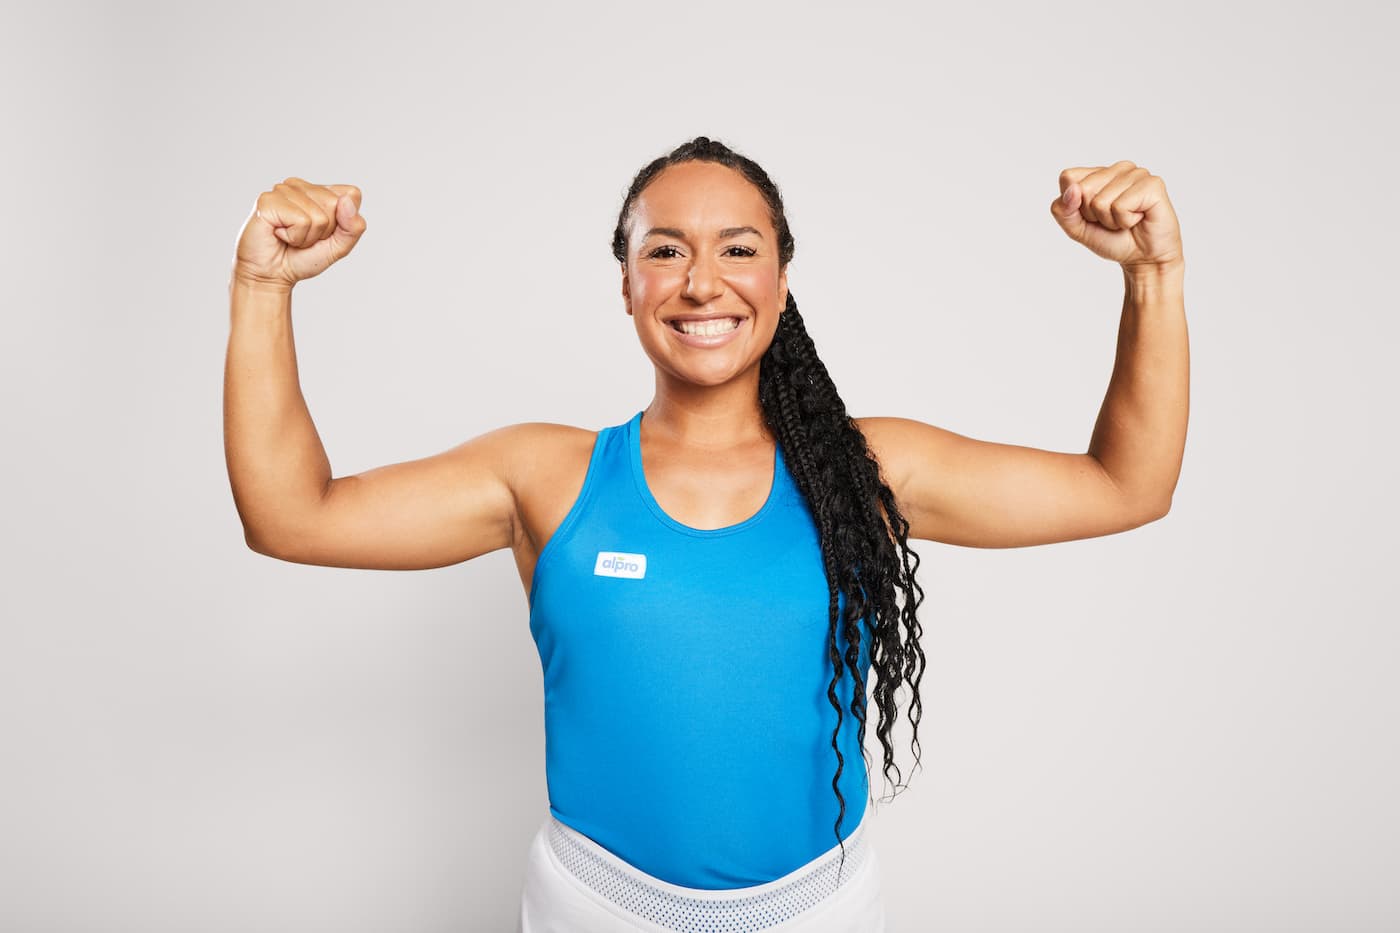 Following a groundbreaking year for british women’s tennis, heather watson embraces plant-based nutrition ahead of big 2022